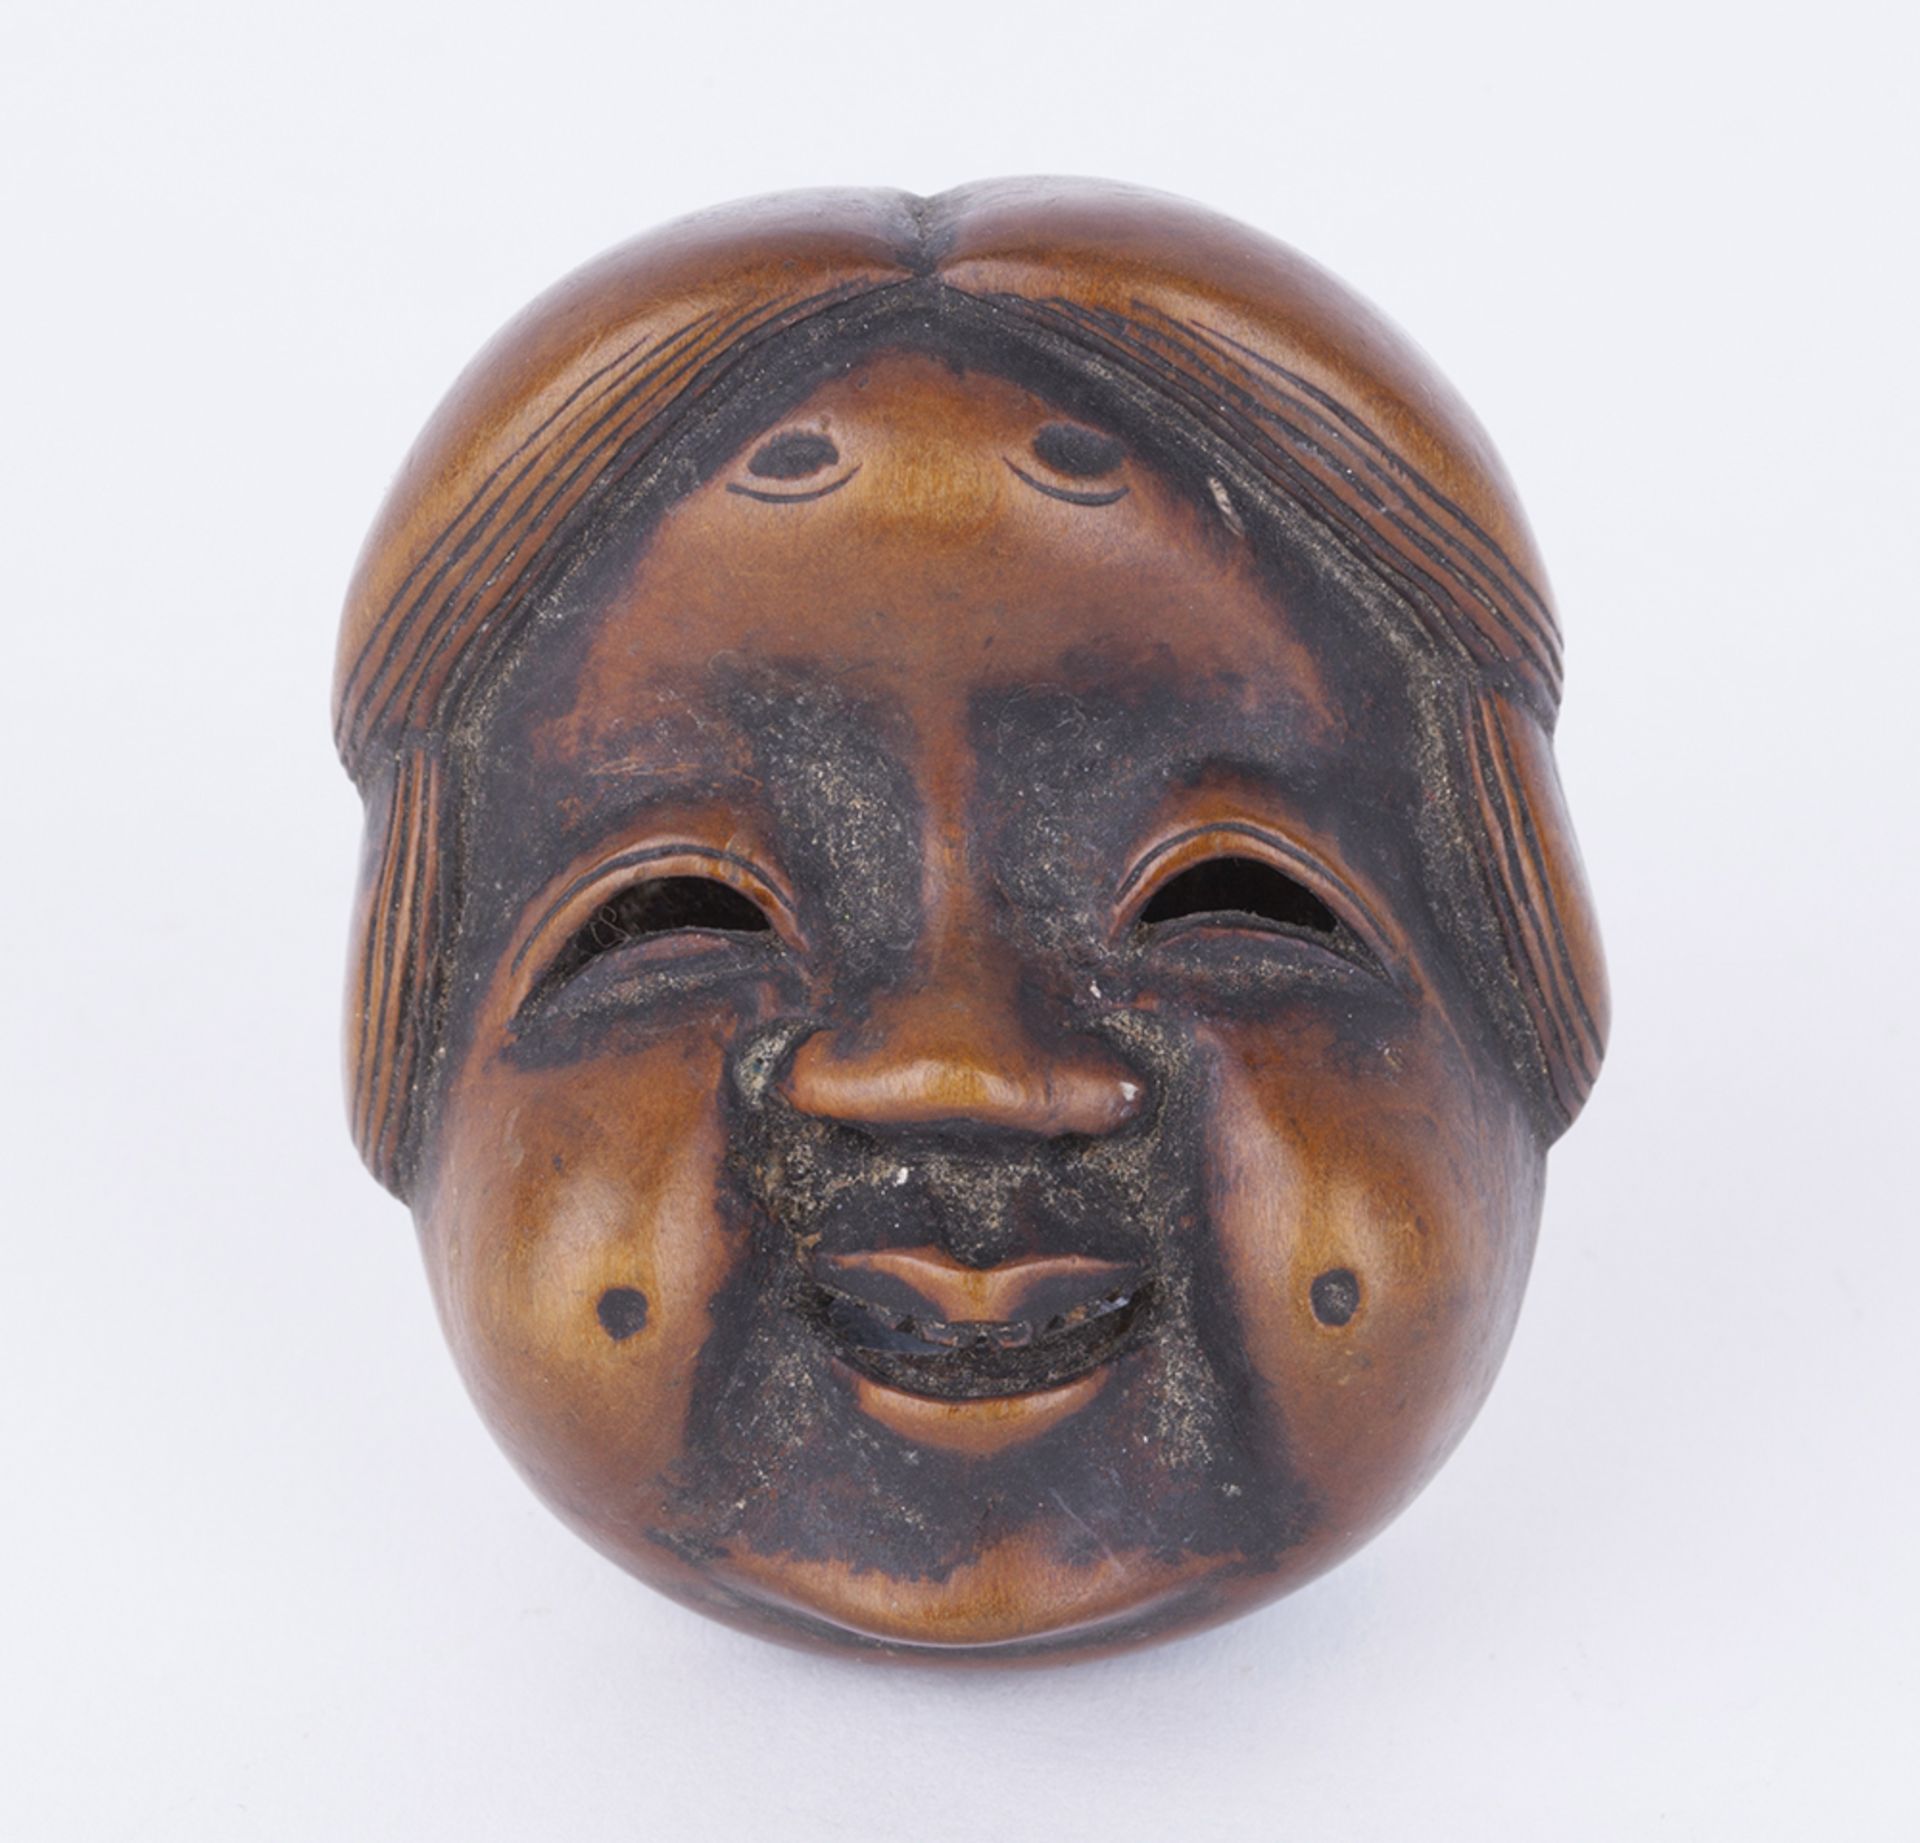 ANTIQUE JAPANESE MINIATURE CARVED WOODEN MASK NETSUKE SIGNED 19TH C.